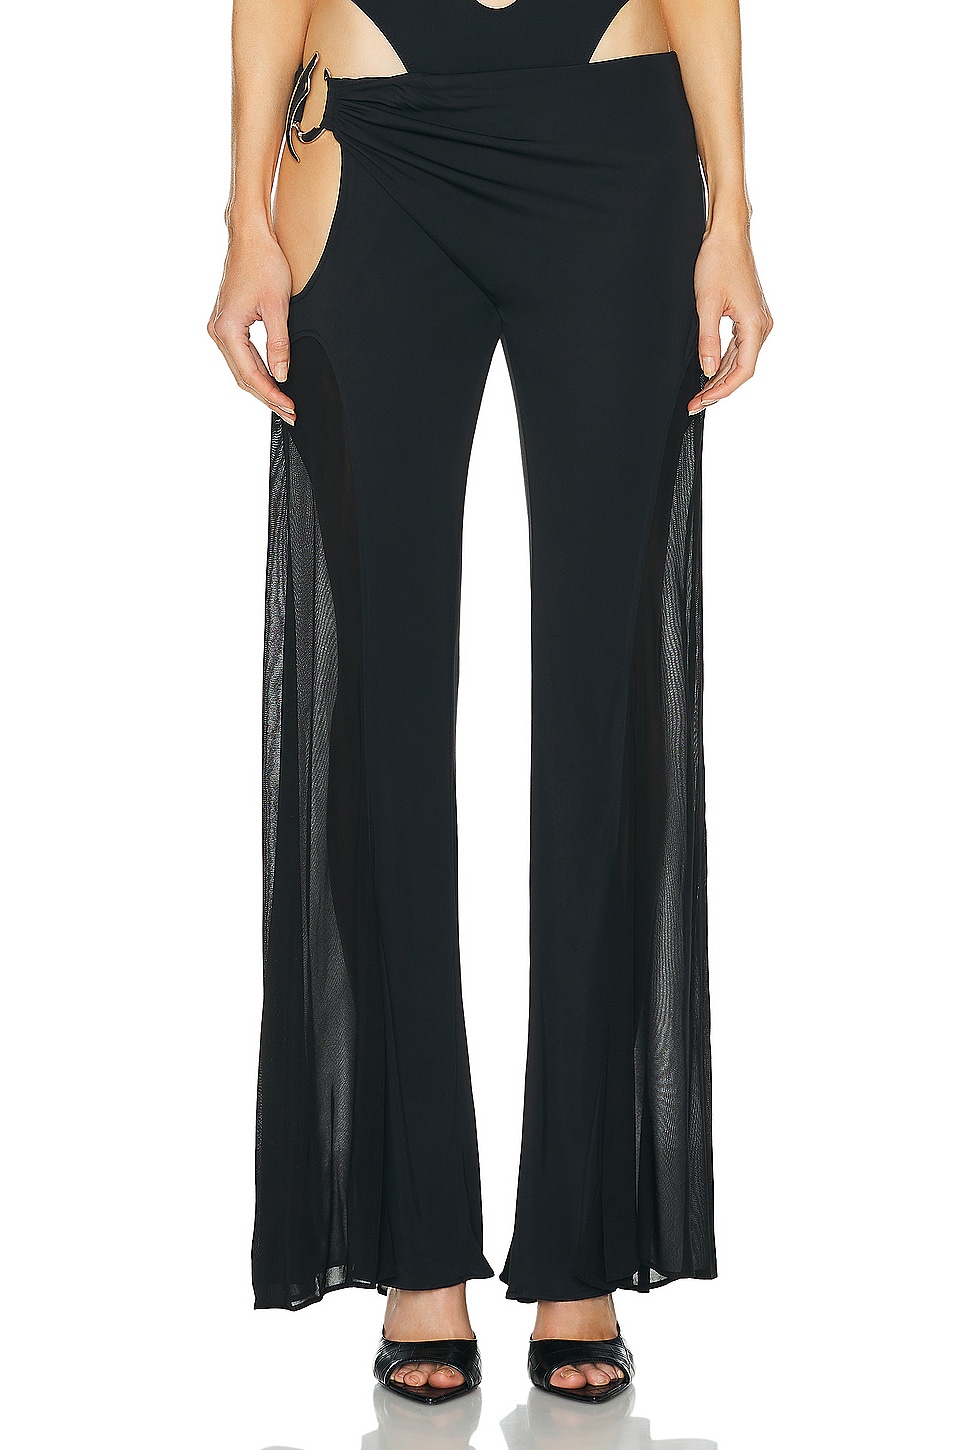 Image 1 of Mugler Flare Cut Out Pant in Black